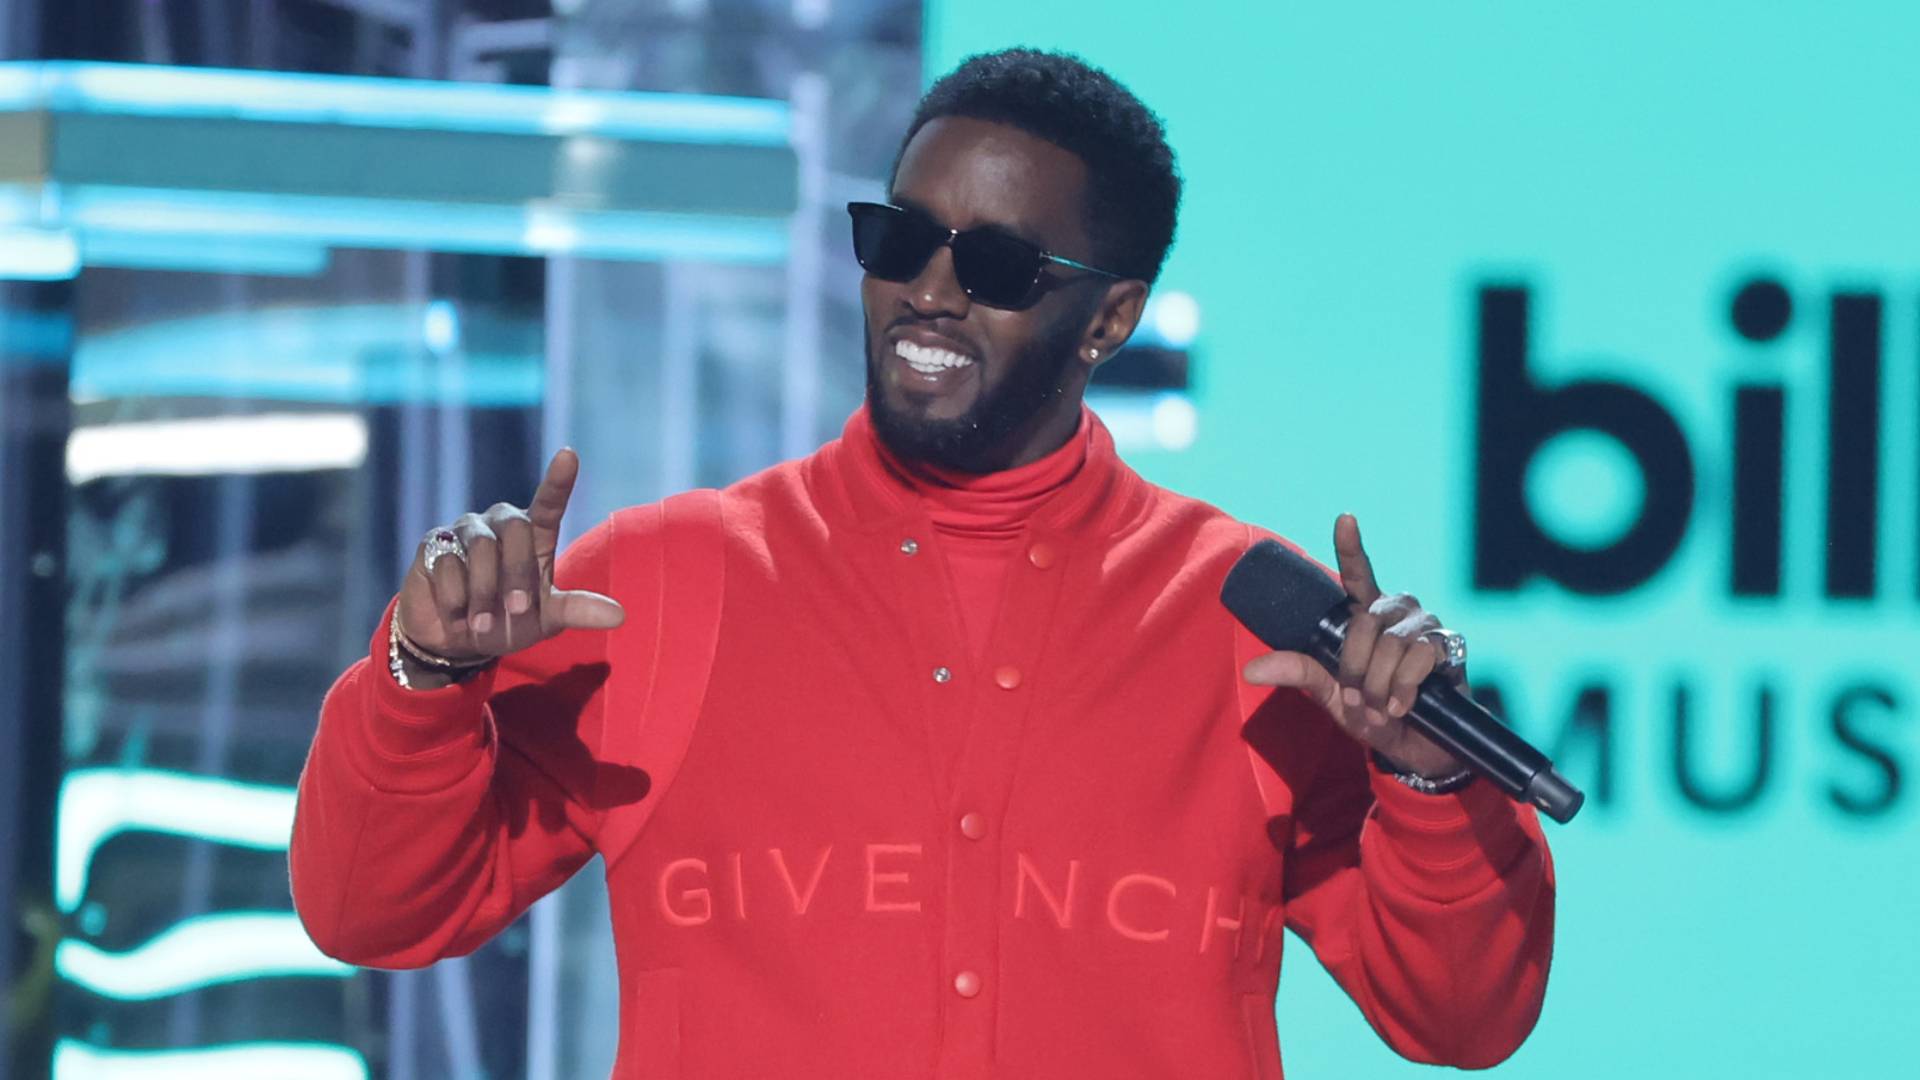 Sean 'Diddy' Combs speaks onstage during the 2022 Billboard Music Awards at MGM Grand Garden Arena on May 15, 2022 in Las Vegas, Nevada. 